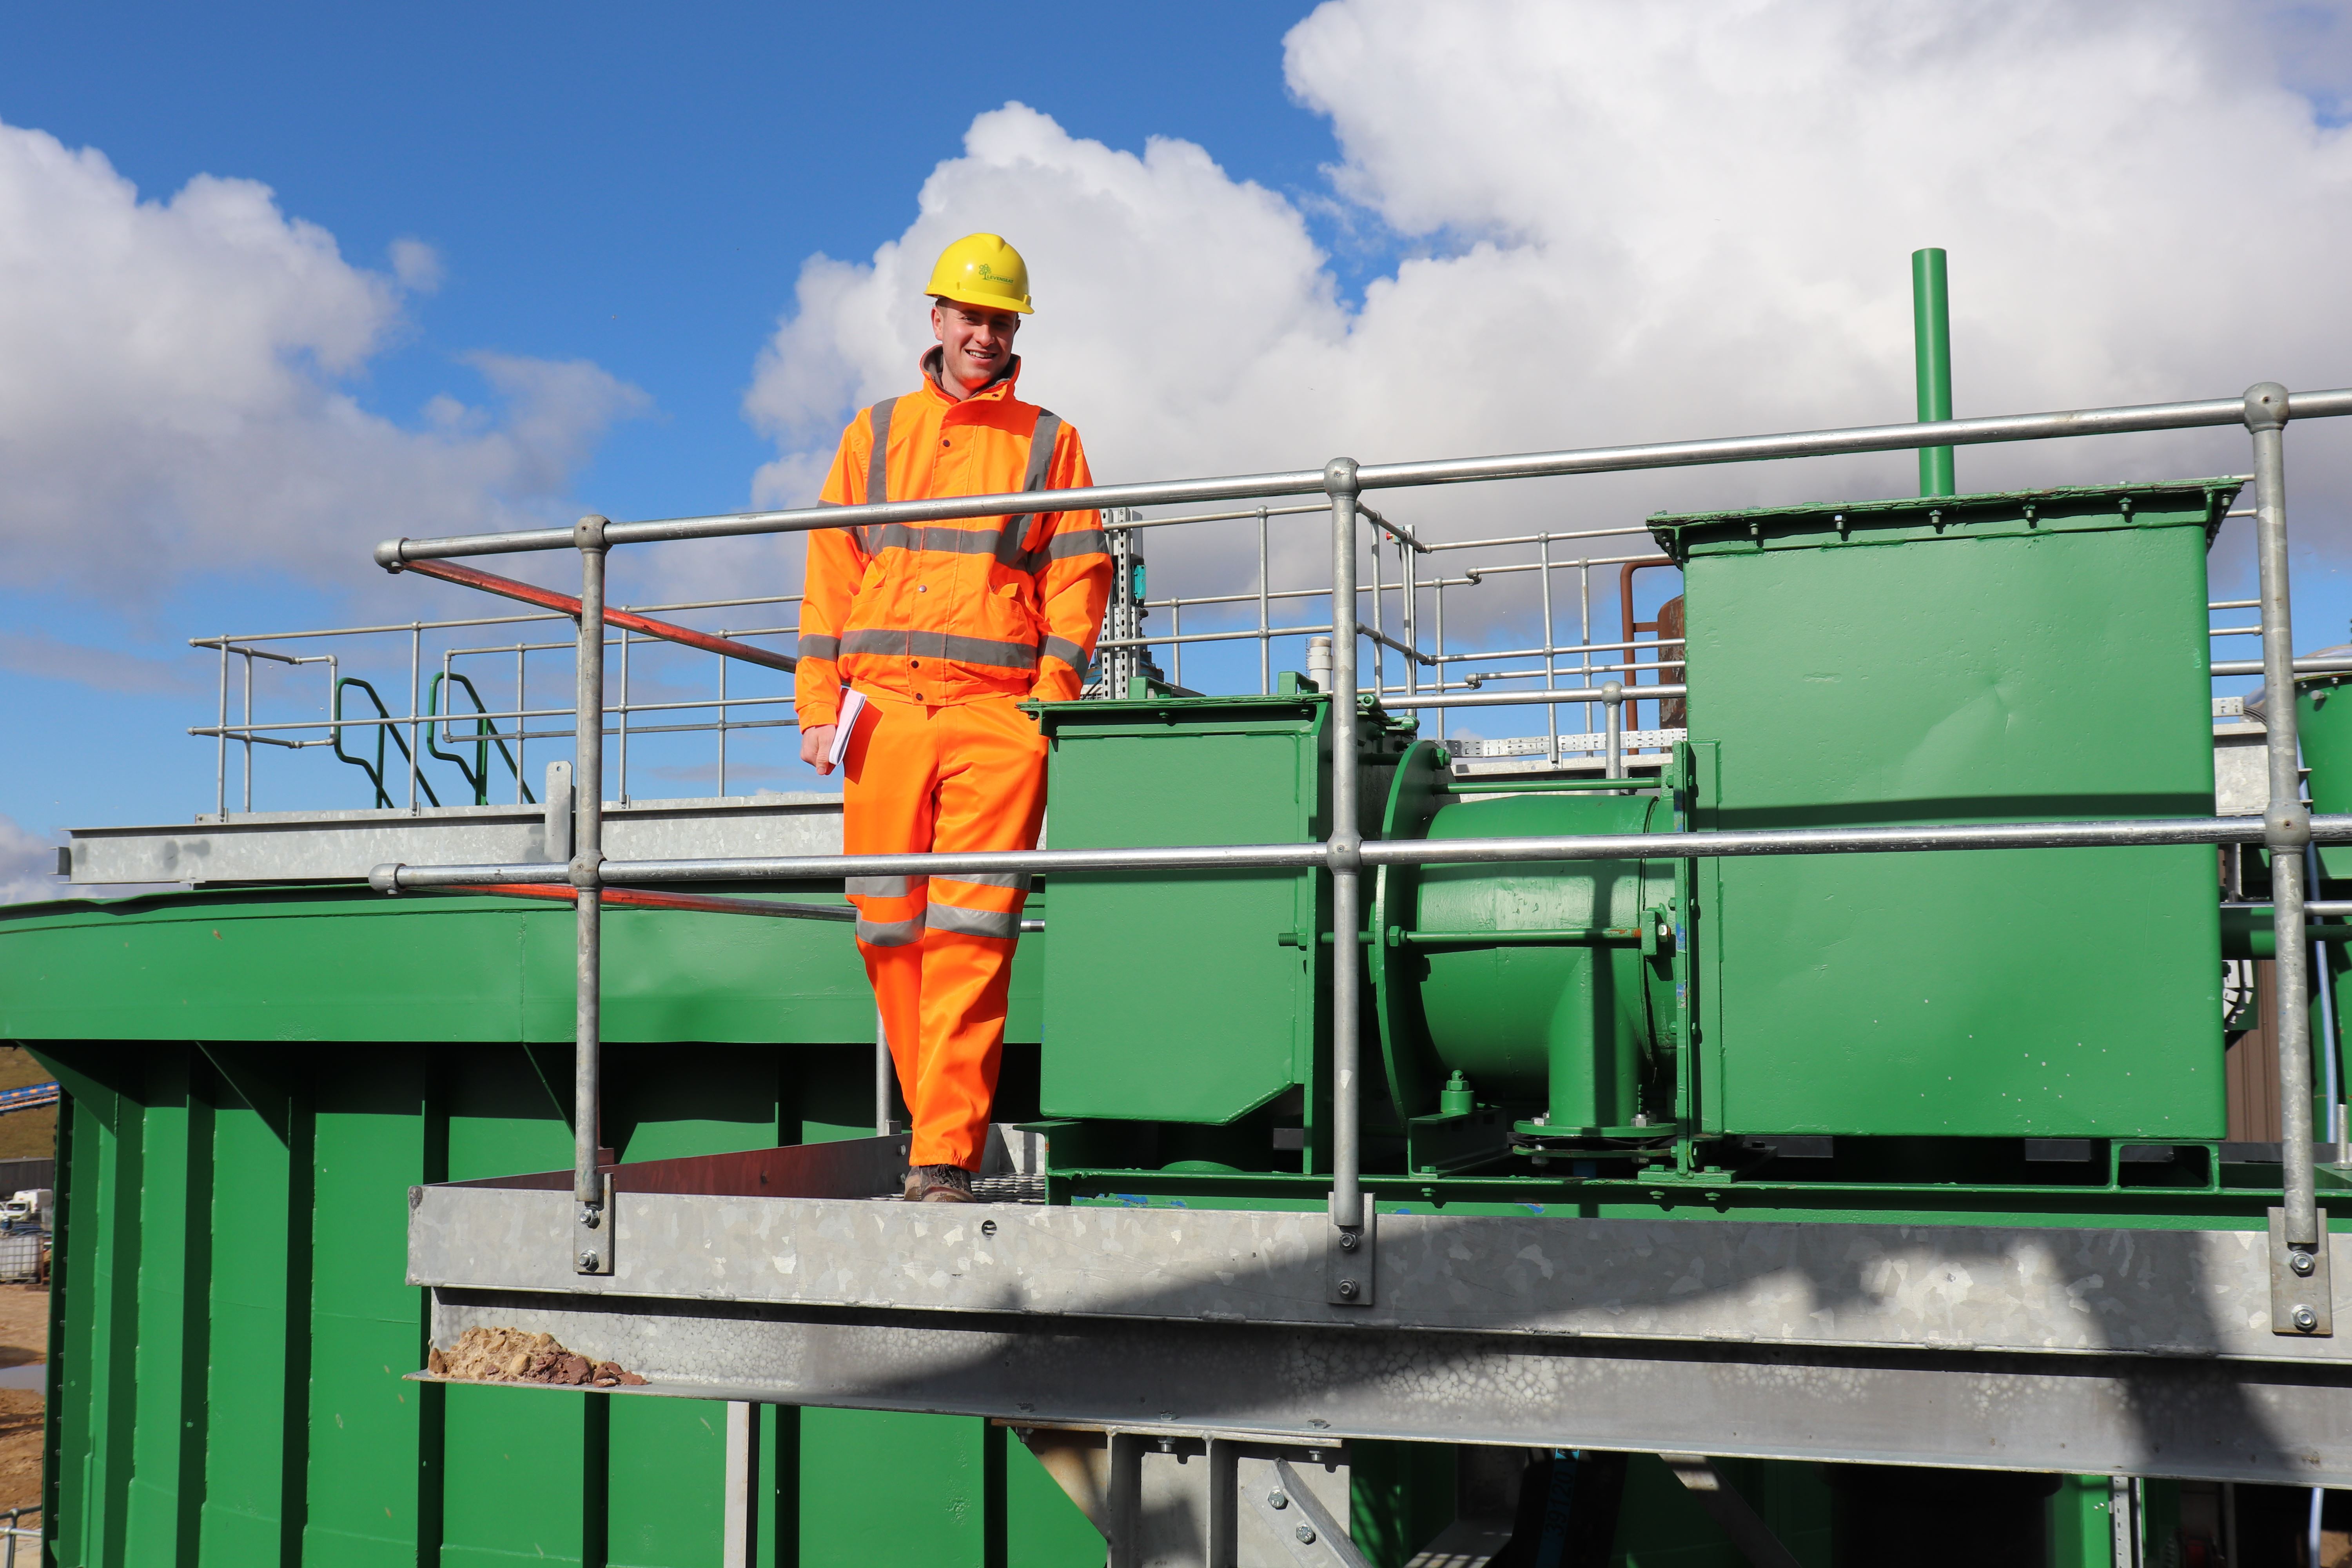 Keir Baillie (Levenseat Graduate Trainee) On Tour Of The Wash Plant